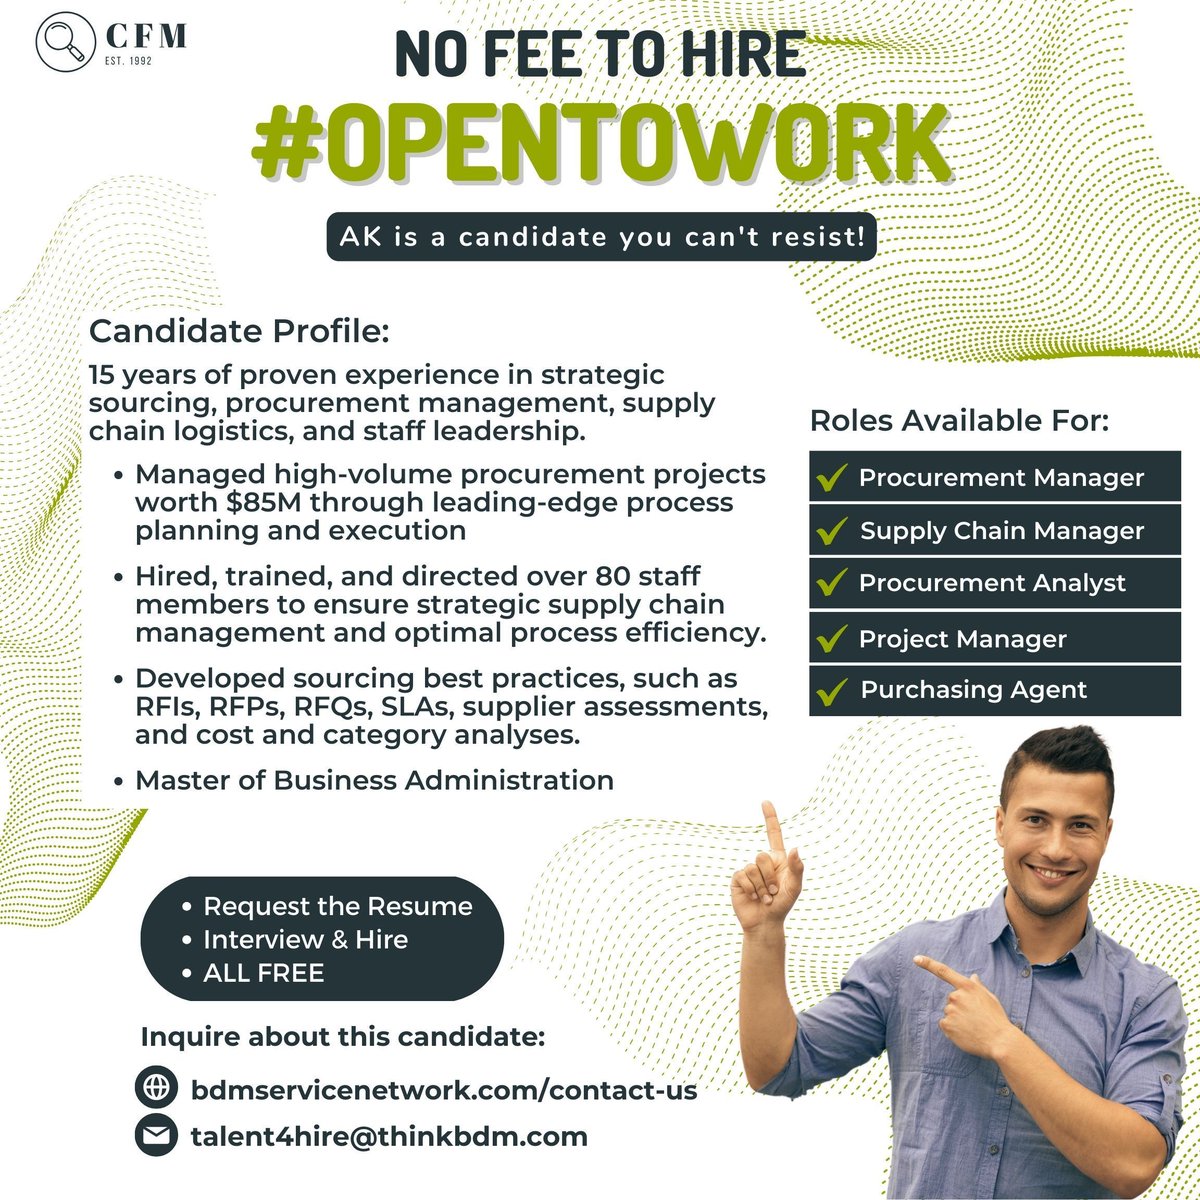 Attention Employers! Want help to fill jobs, hire candidates like AK, and pay zero fees, even when you hire? Visit buff.ly/3I9u7kp #opentowork #procurementmanager #supplychainmanager #procurementanalyst #procurementspecialist #procurementofficer #purchasingagent